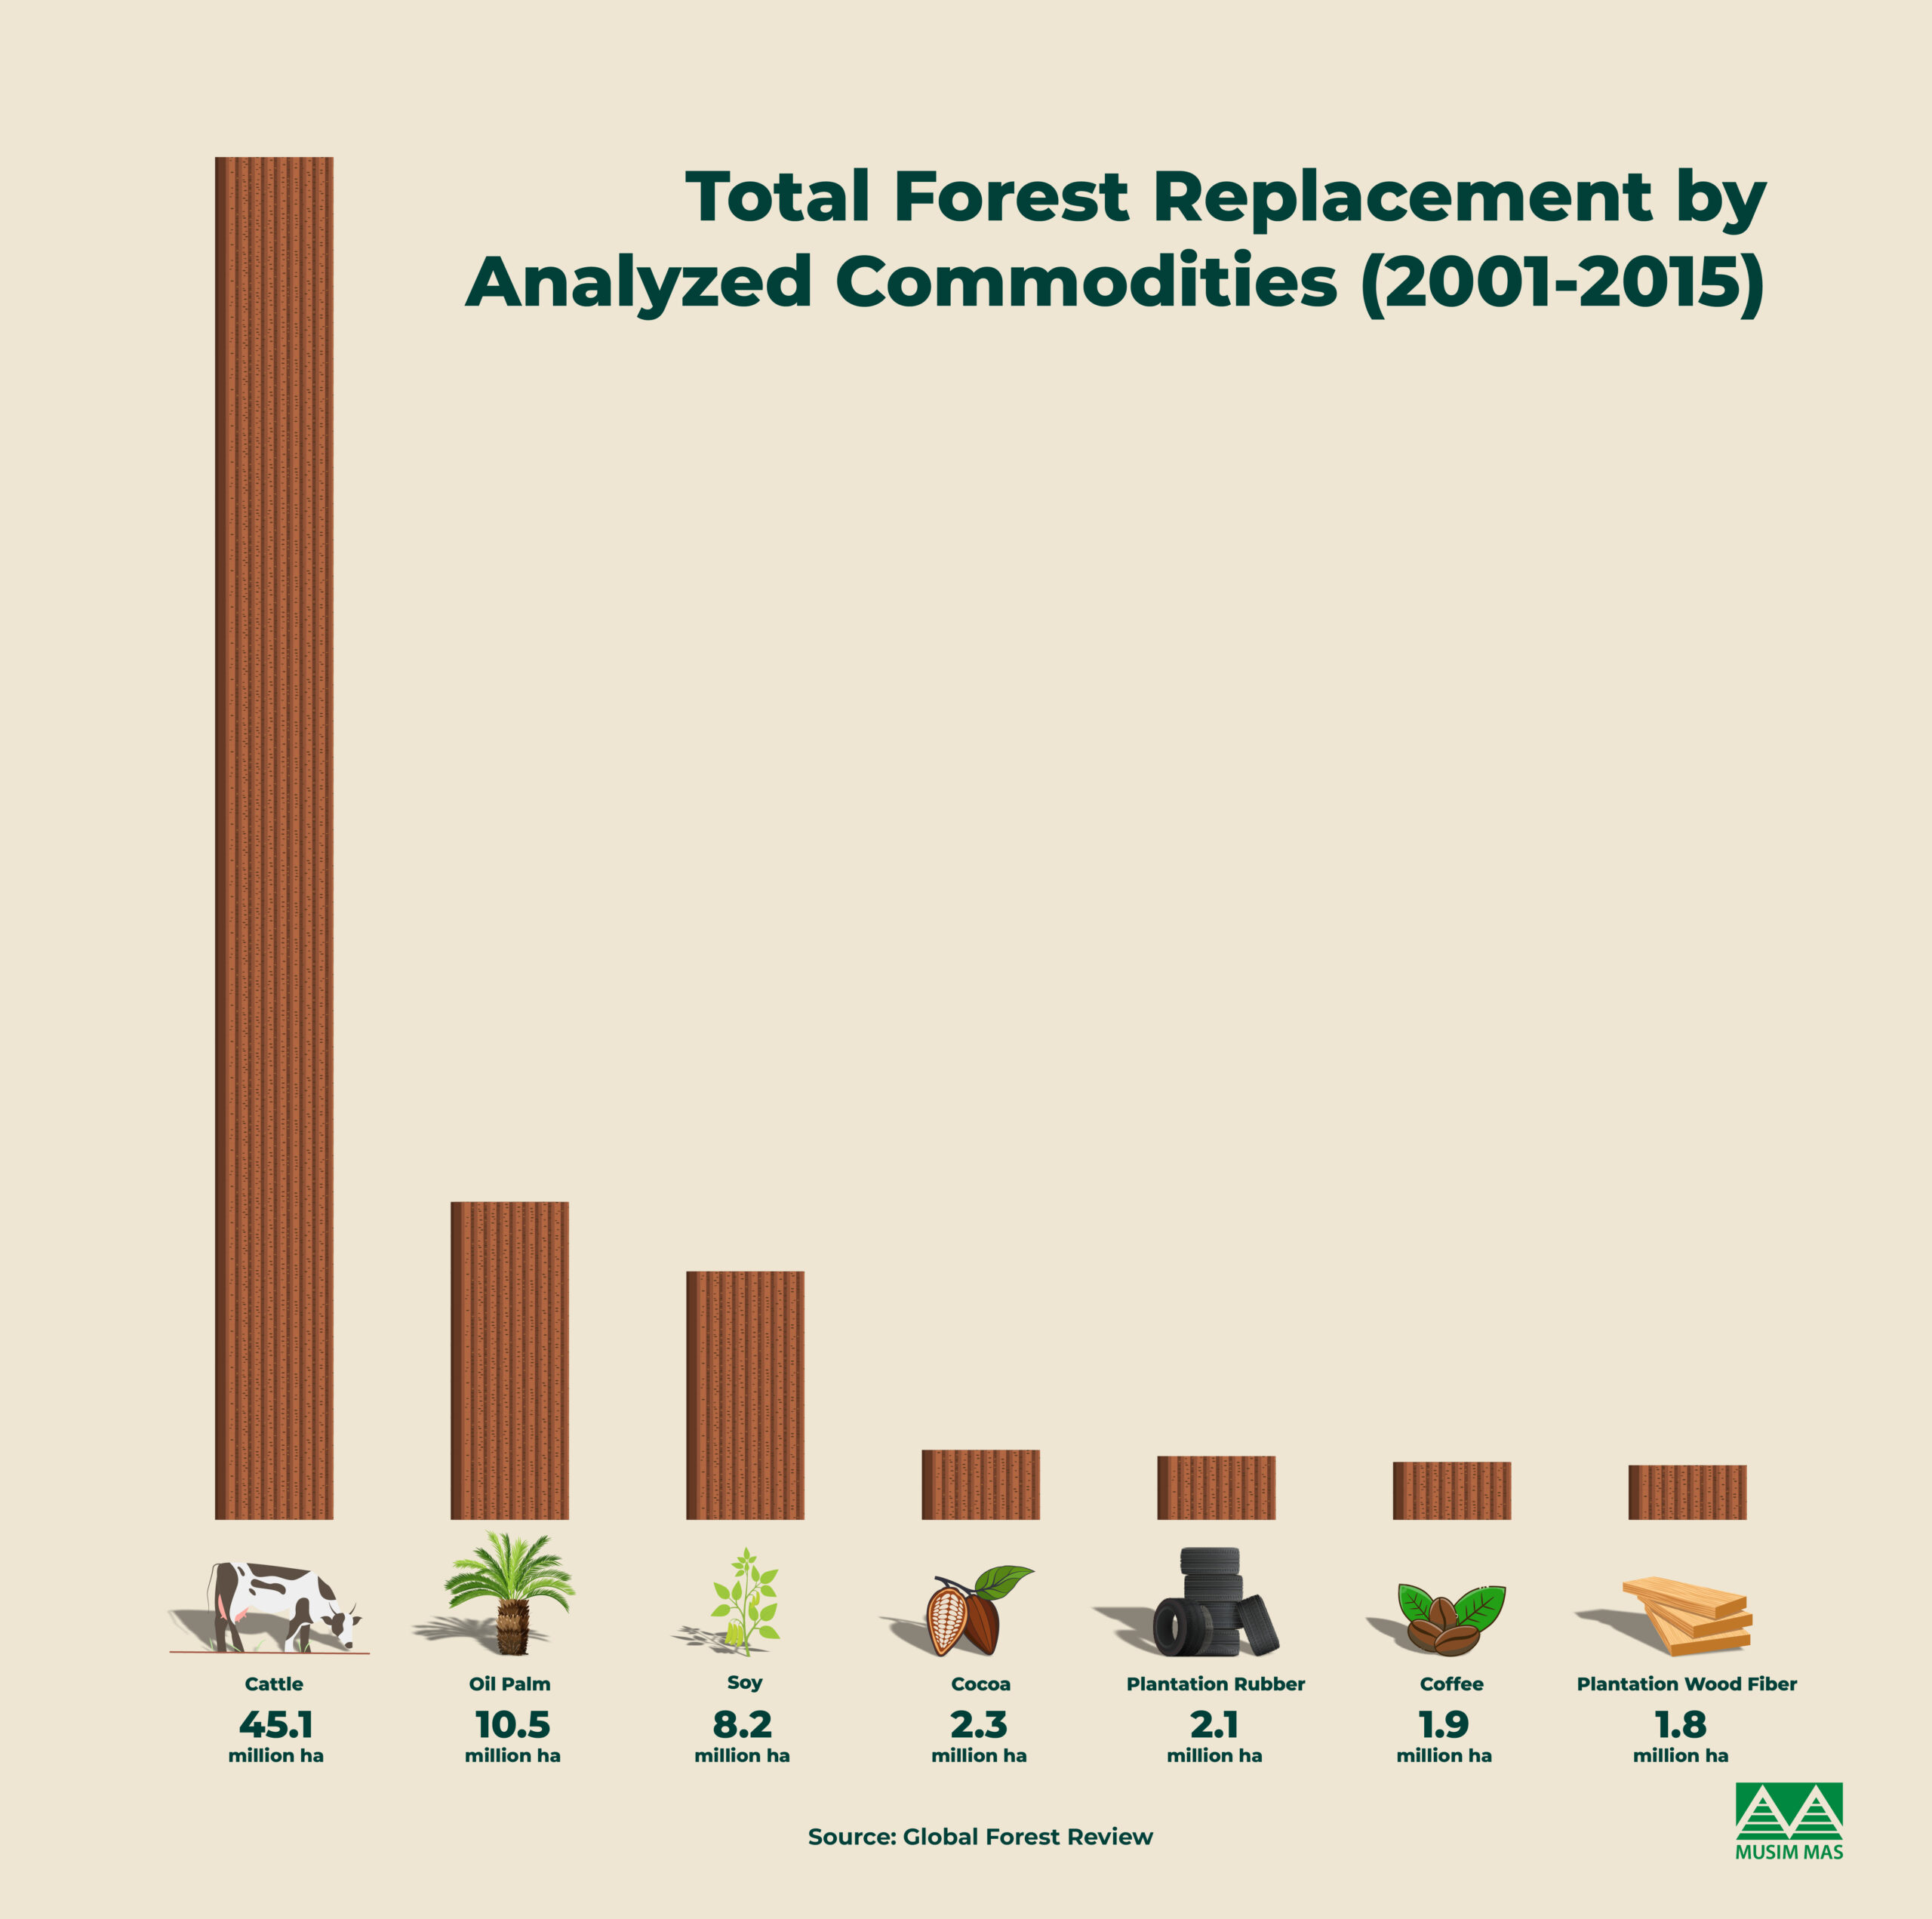 Total forest replacement by analyzed commodities